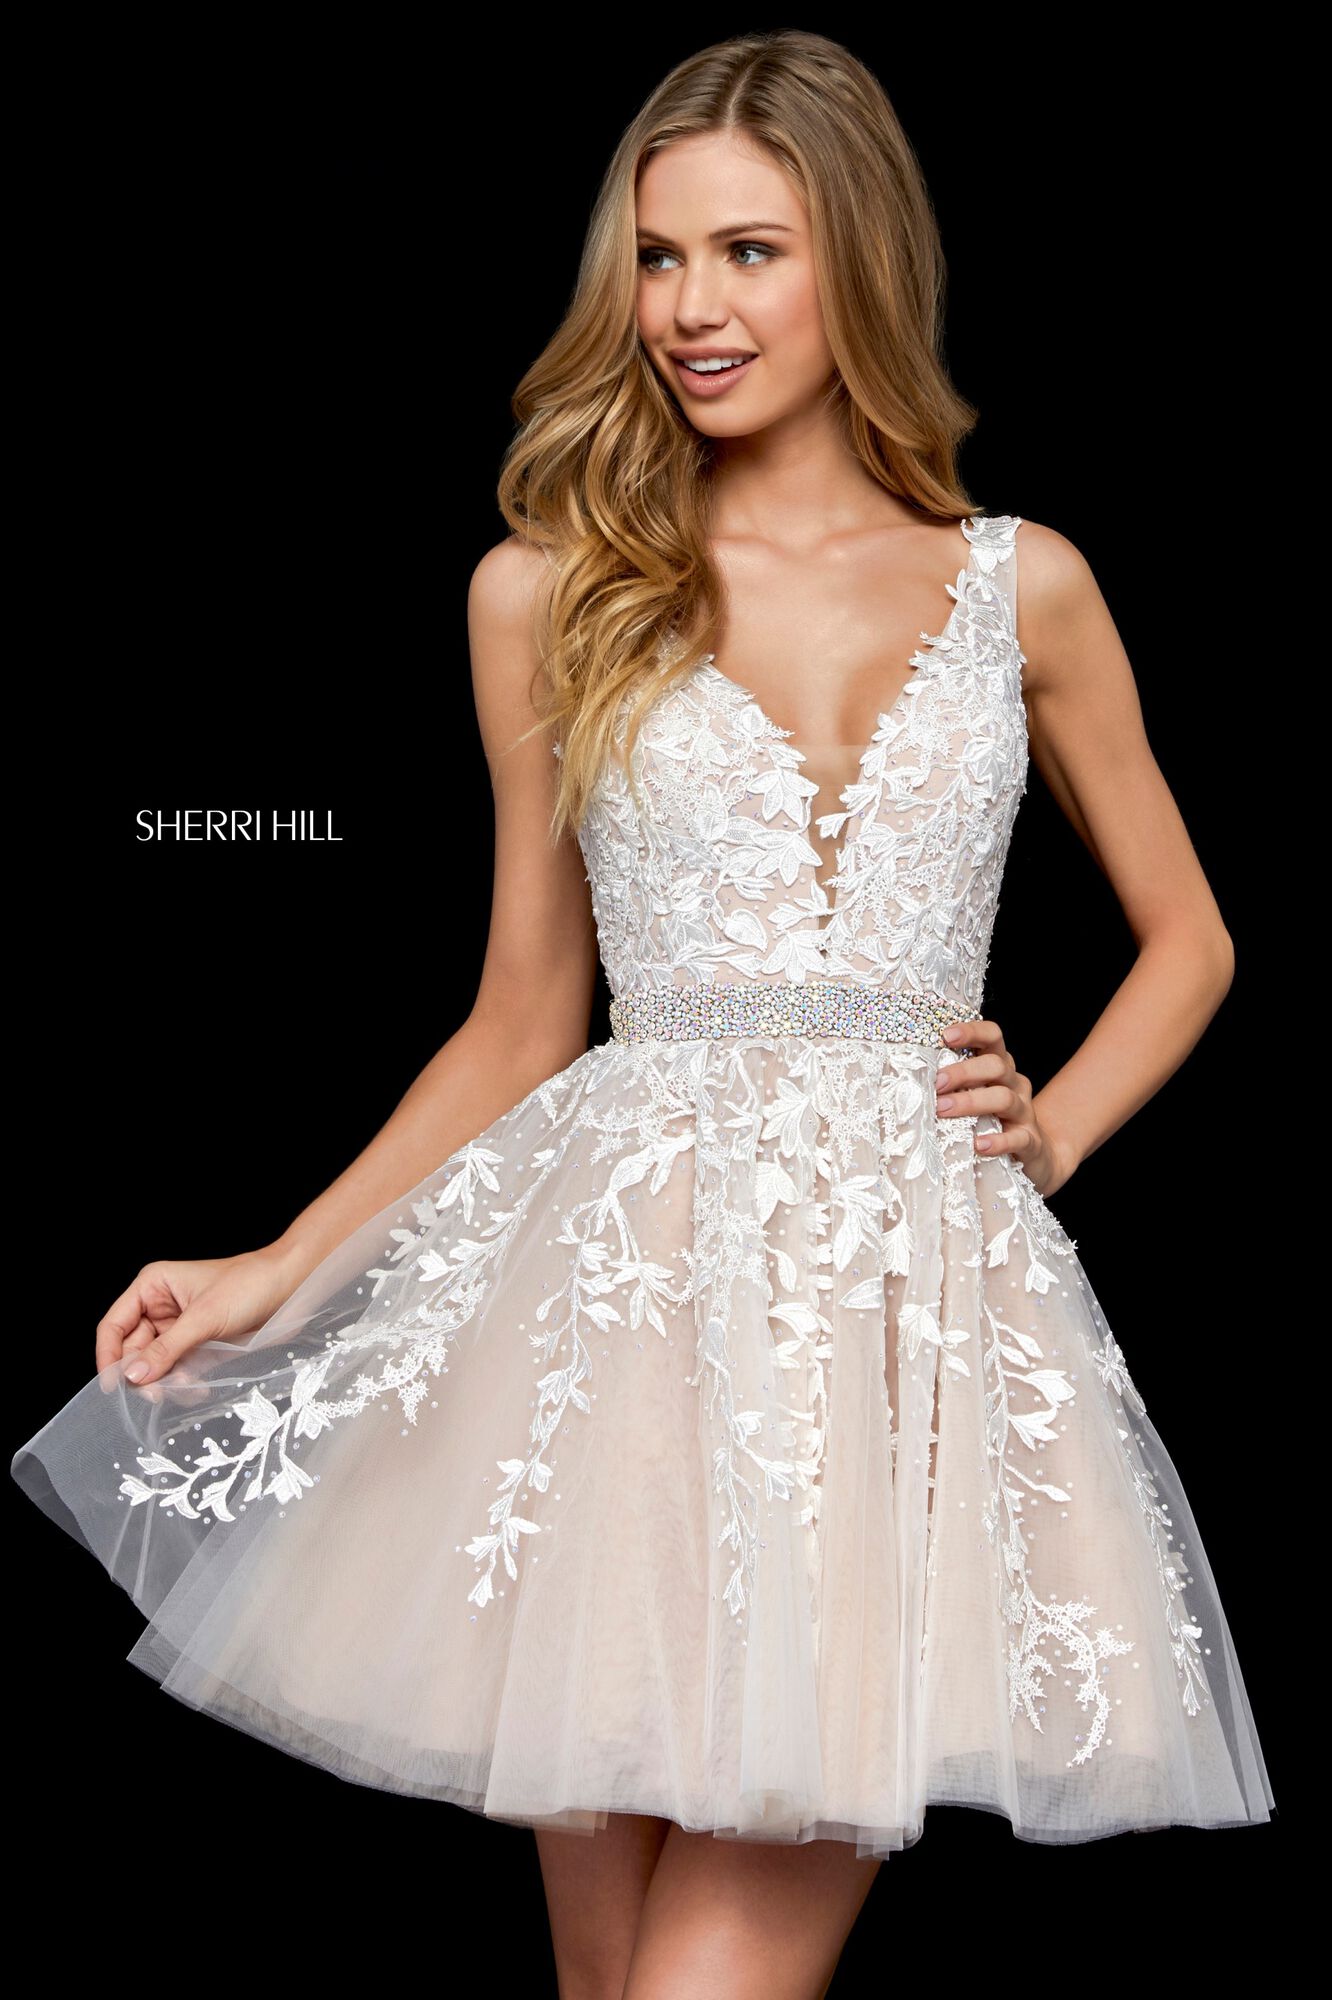 Admirable jueves Indígena Buy dress style № 52157 designed by SherriHill